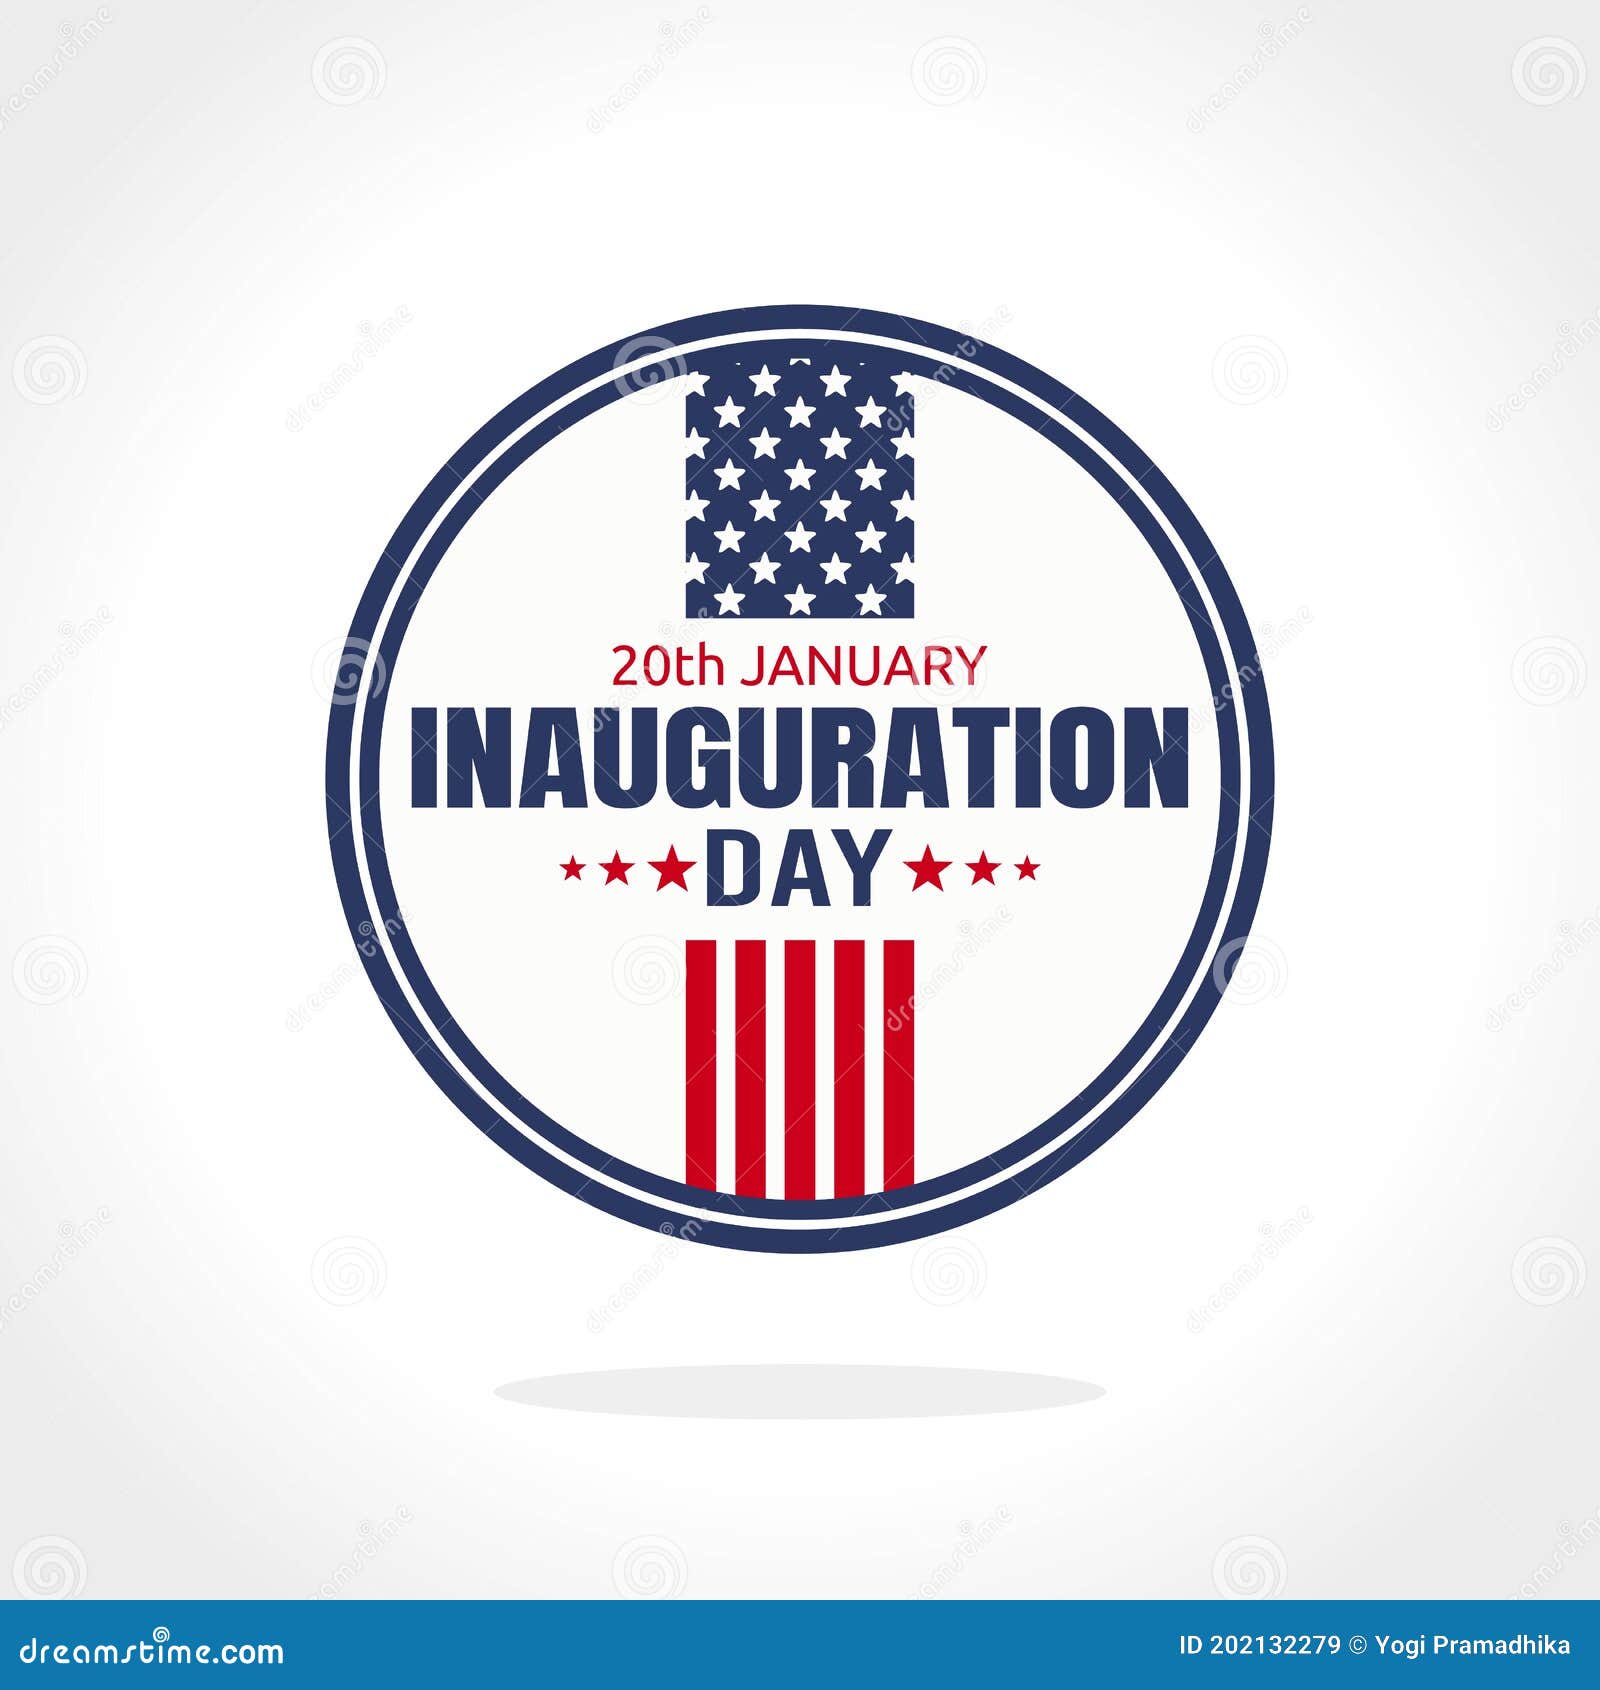 inauguration day in united state of america  